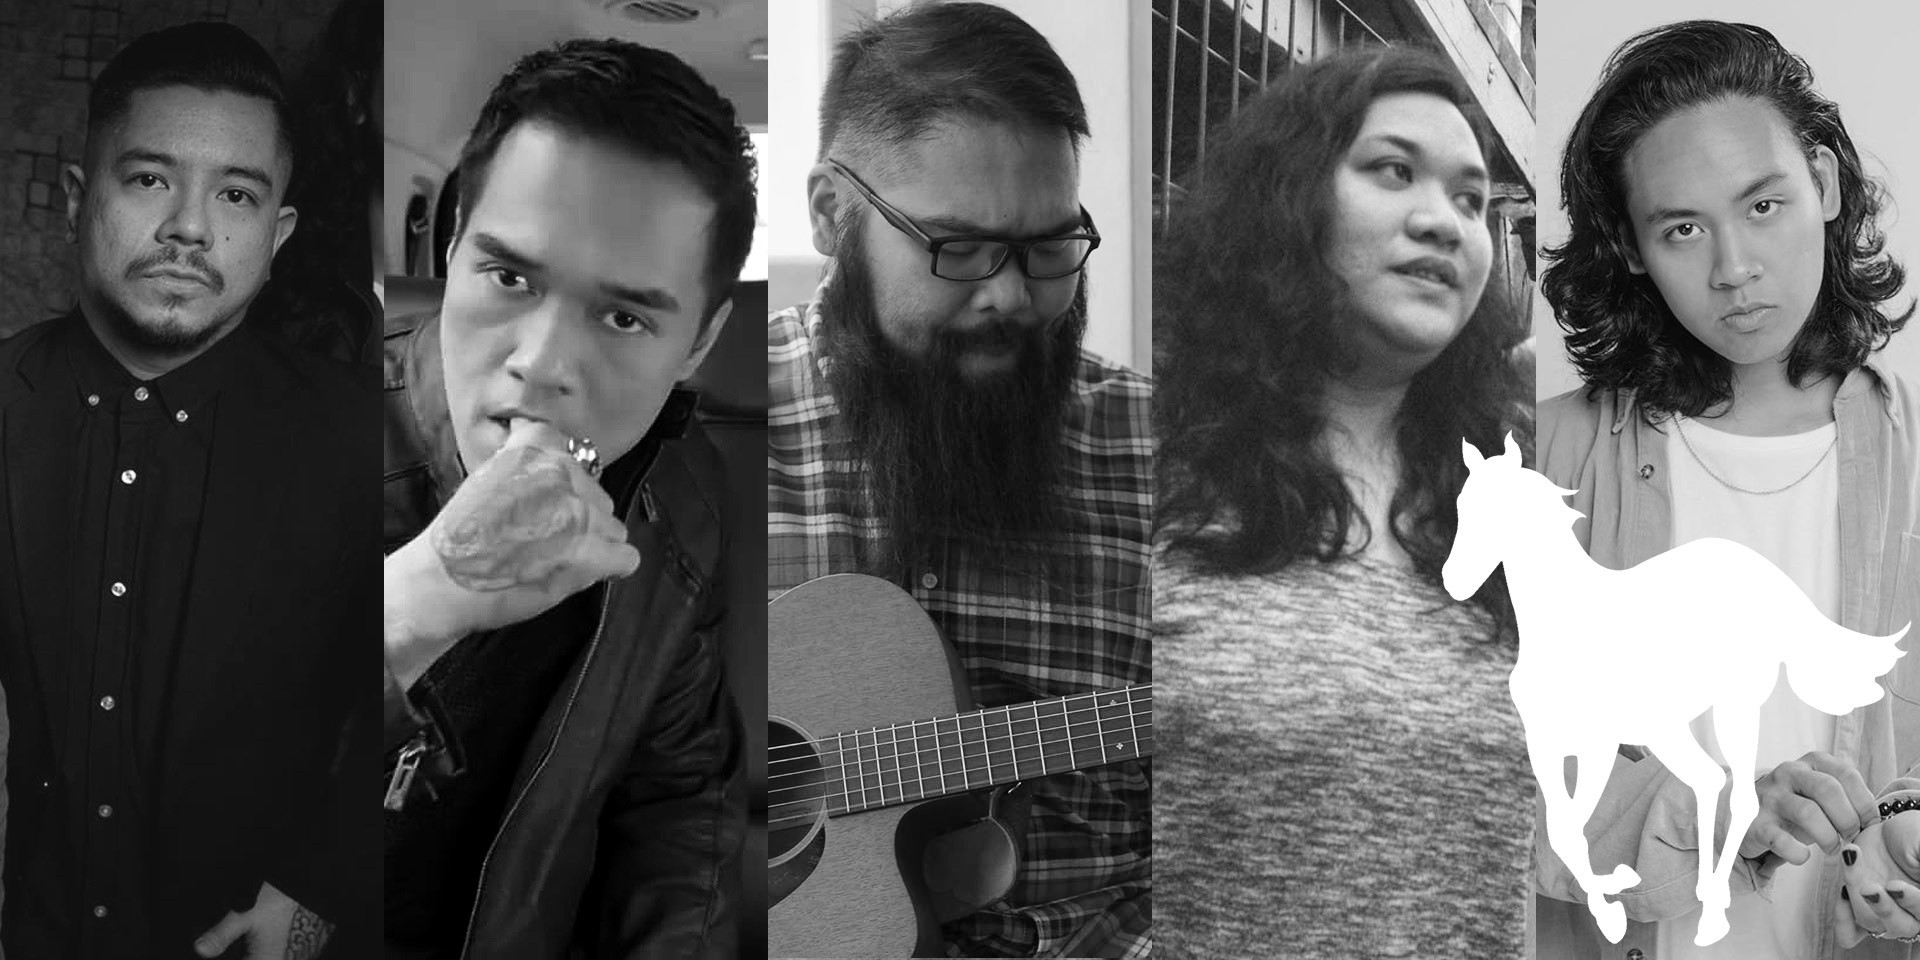 Filipino musicians talk about how Deftones' White Pony influenced their tastes and creative processes